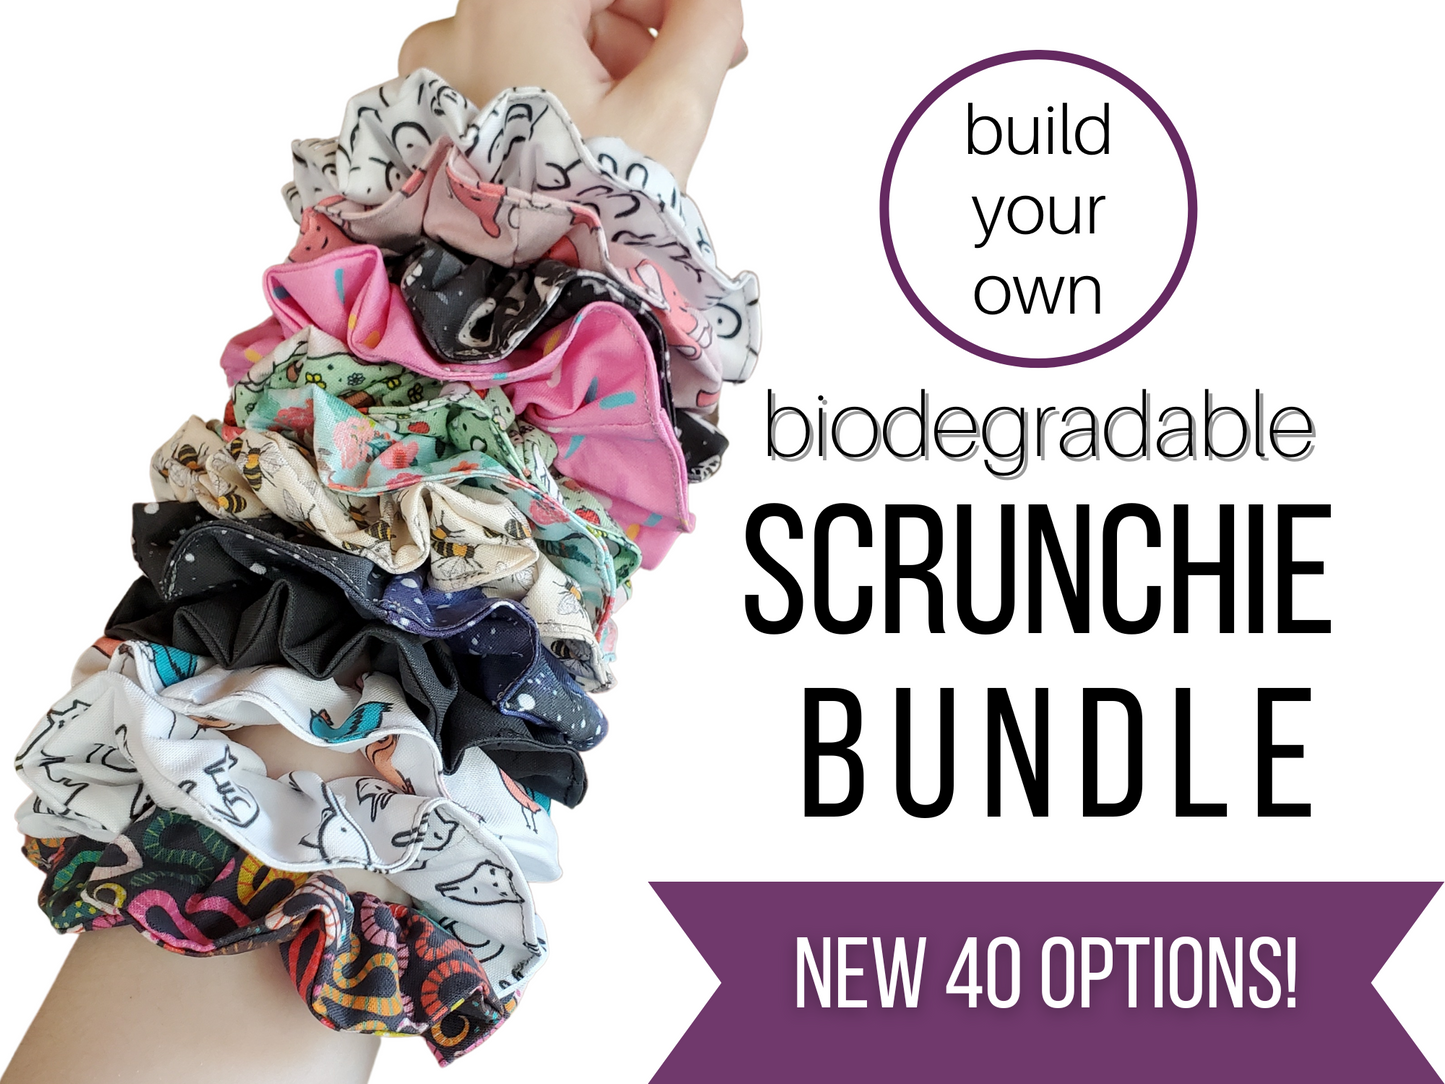 Build your own biodegradable scrunchie bundle - new 40 options. Photo shows a random assortment of about 12 scrunchies stacked on my arm.